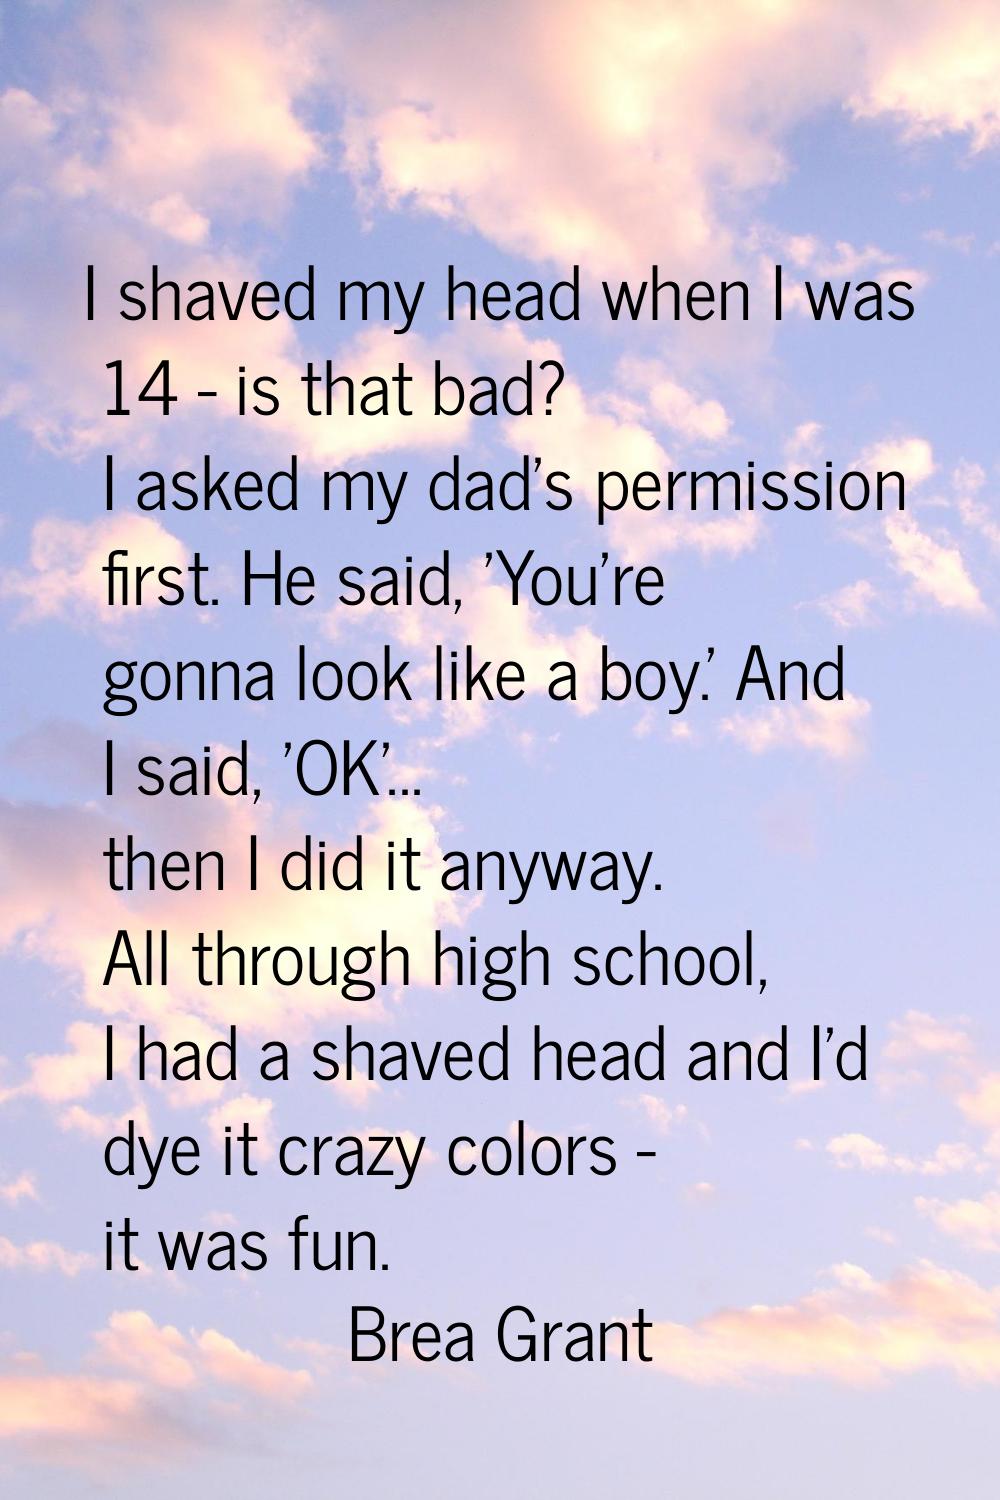 I shaved my head when I was 14 - is that bad? I asked my dad's permission first. He said, 'You're g